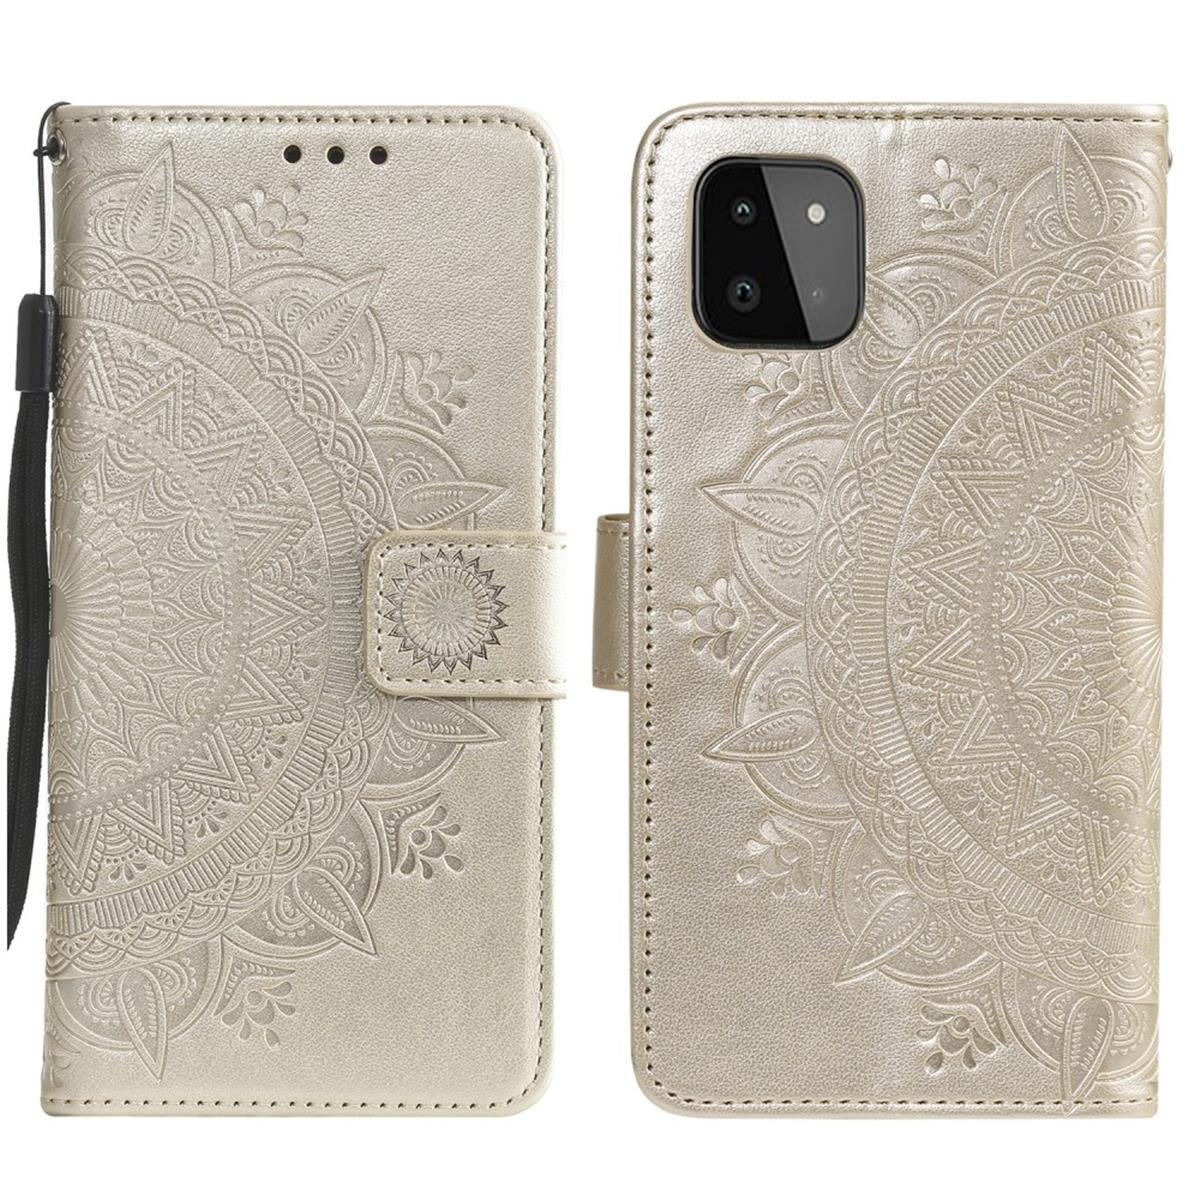 Galaxy Samsung, Gold Bookcover, COVERKINGZ Klapphülle 5G, Muster, Mandala A22 mit